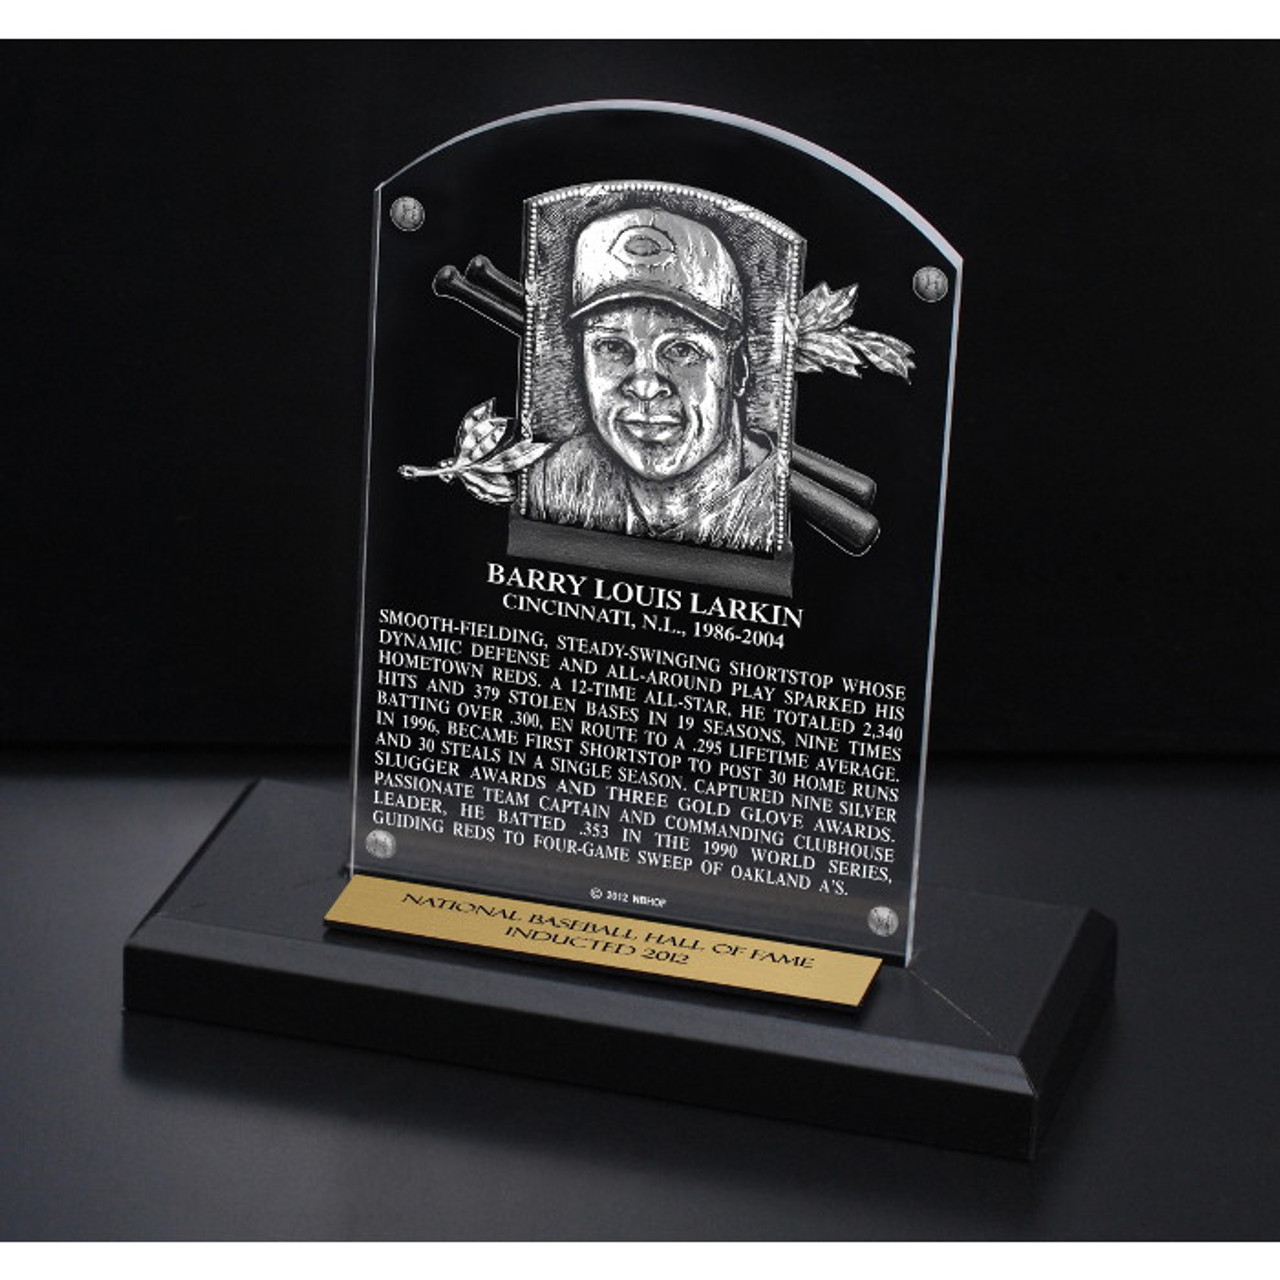 An inside look at Barry Larkin's Hall of Fame Induction